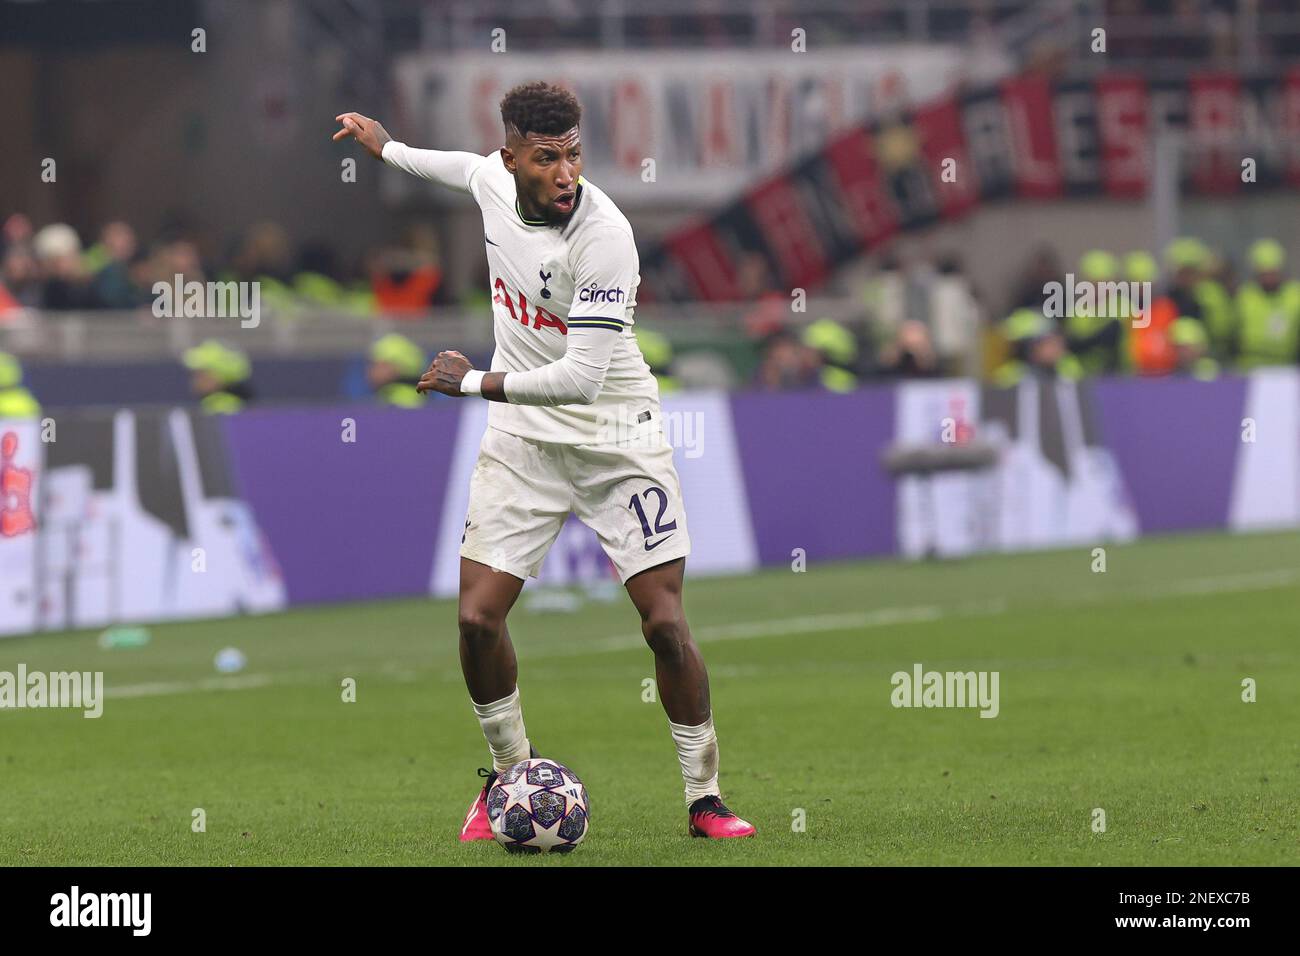 Milan, Italy. 14th Feb, 2023. Italy, Milan, feb 14 2023: Emerson Royal  (Tottenham defender) dribbles in front court in the second half during  soccer game AC MILAN vs TOTTENHAM HOTSPUR, round of